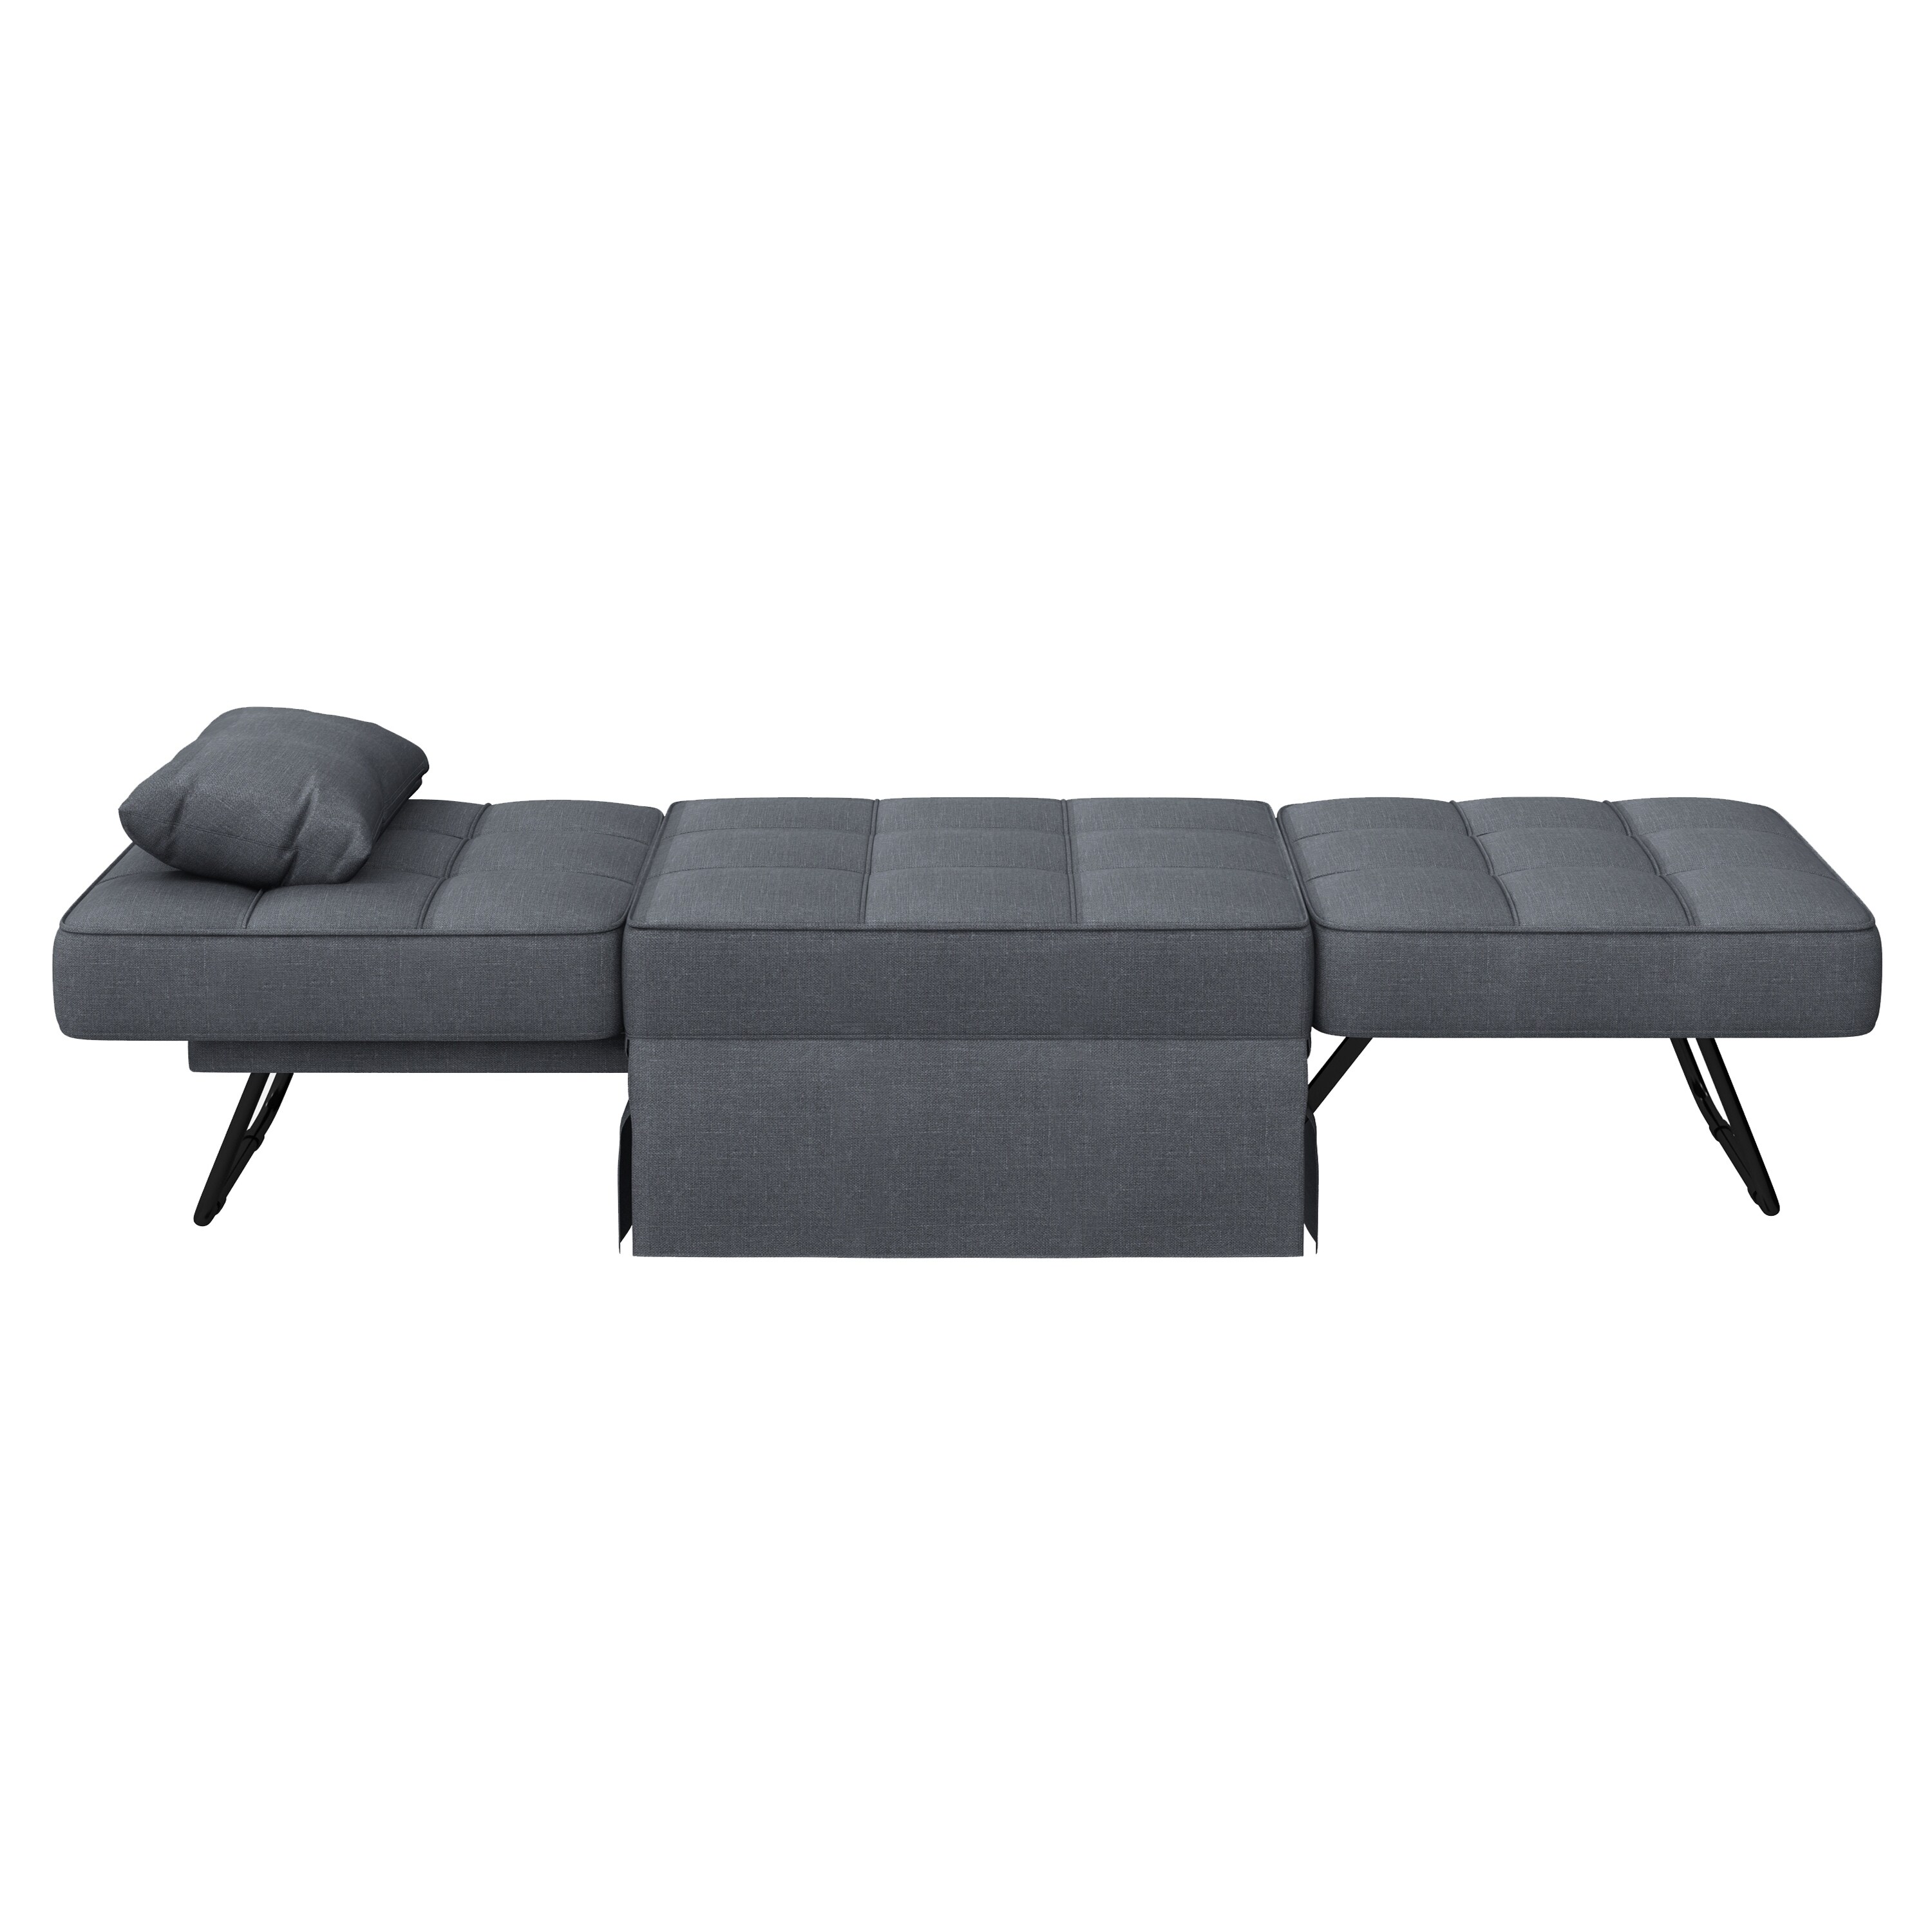 Convertible Futon Sofa Bed Sleeper Sofa Chair Couch Folding Ottoman Back  Adjustable for Living Room - On Sale - Bed Bath & Beyond - 35665771